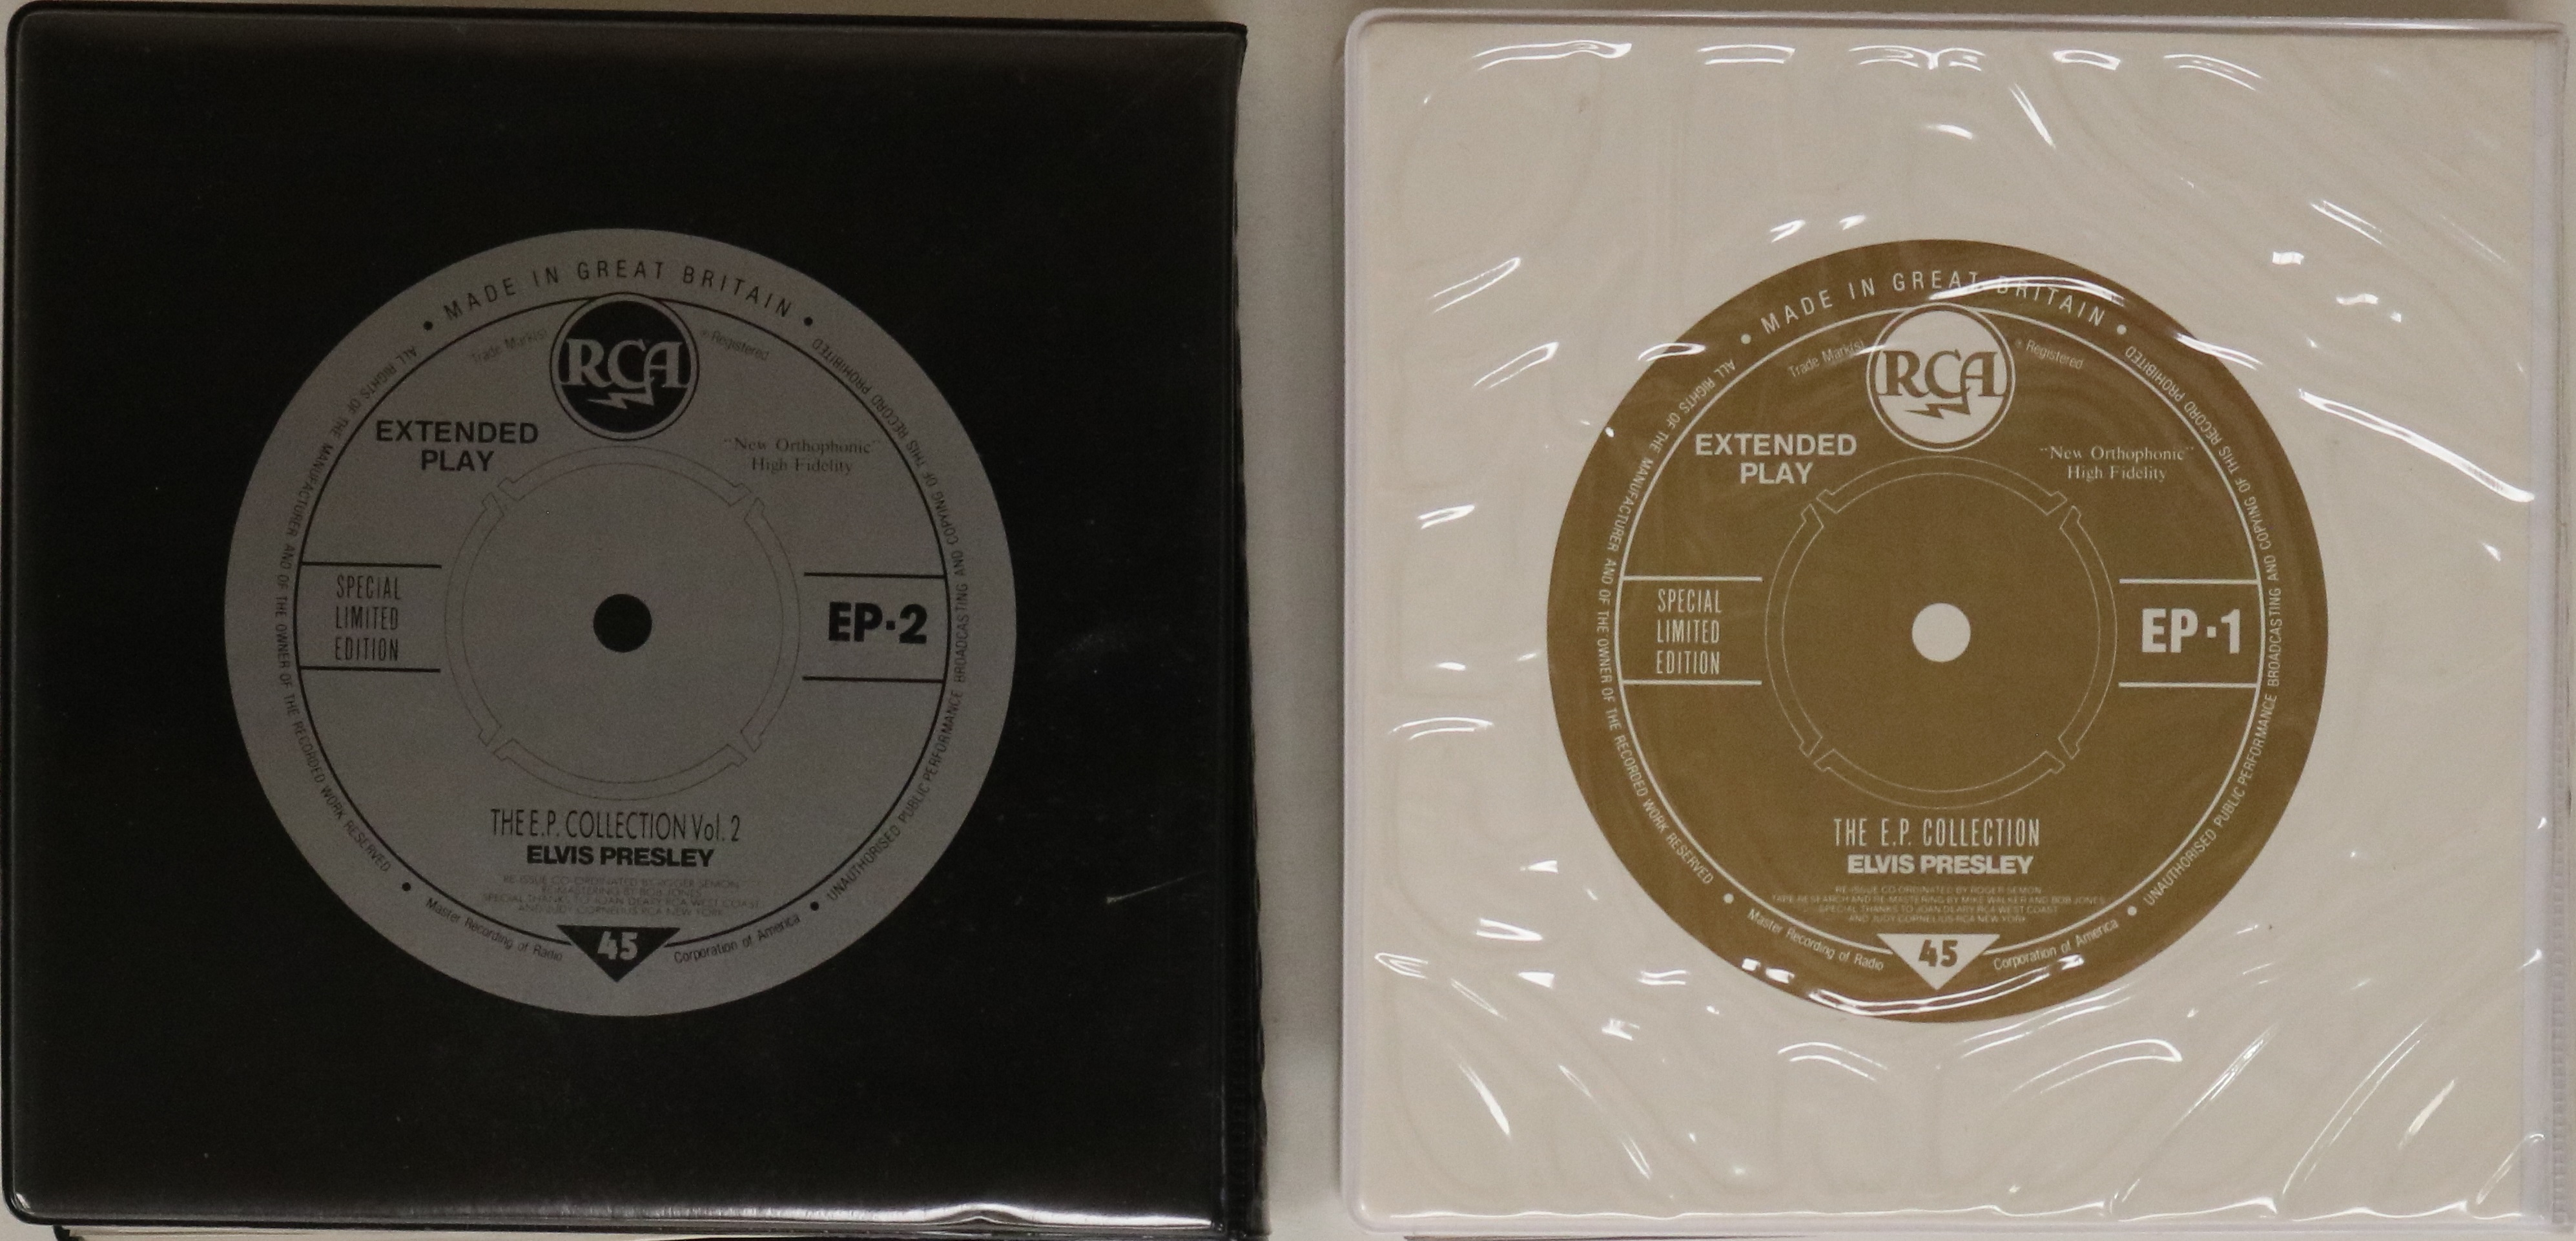 ELVIS PRESLEY - THE E.P. COLLECTION ALBUMS - BOX SETS. - Image 2 of 5